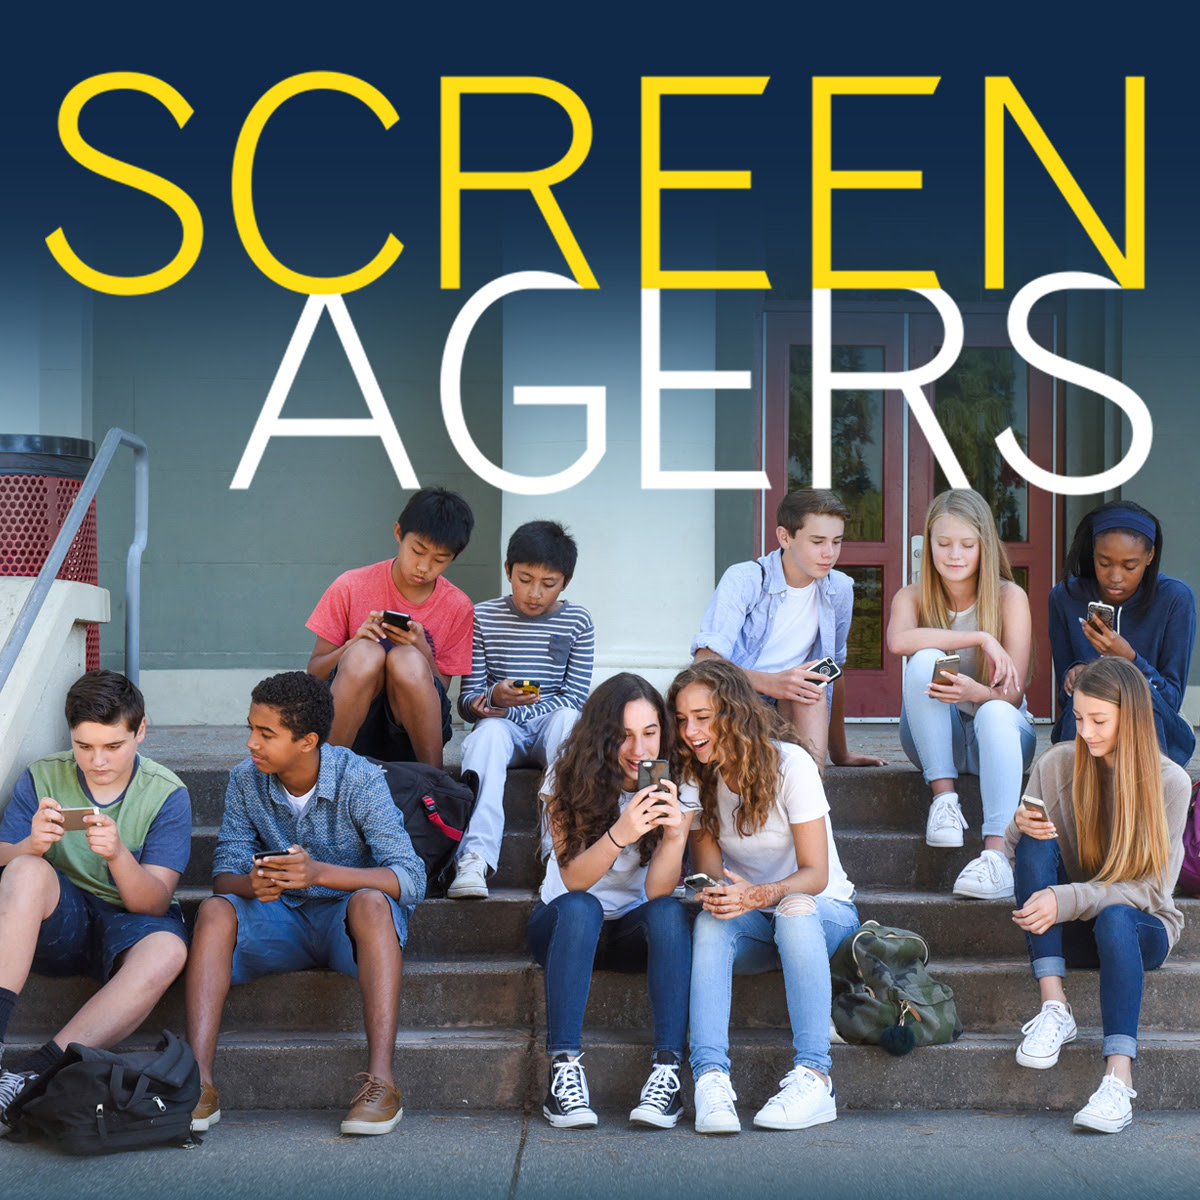 Screenagers Film Presented By PS 20 Anna Silver School PTA